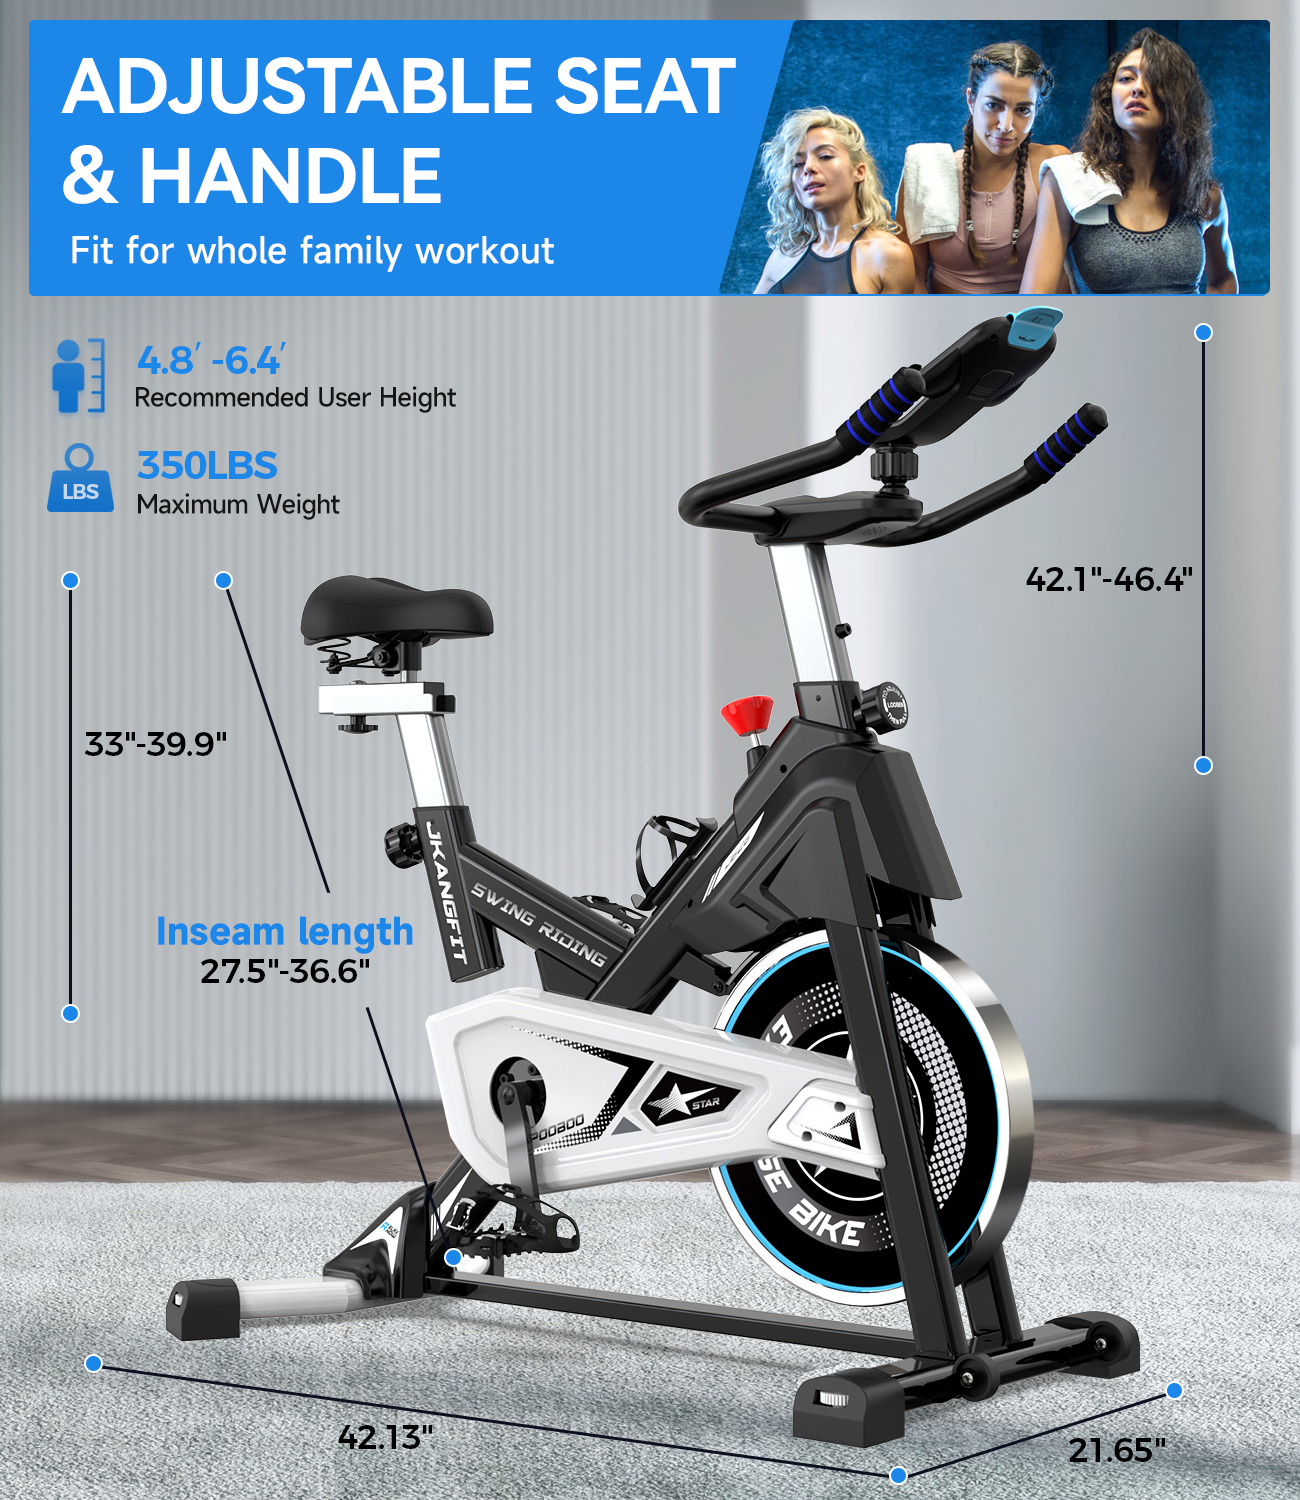 Pooboo Magnetic Exercise Bike Stationary Indoor Cycling Bike with Built-In Bluetooth Sensor Compatible with Exercise Bicycle apps&Ipad Mount, Comfortable seat&Slant Board, Silent Belt Drive, 350lbs - image 2 of 6